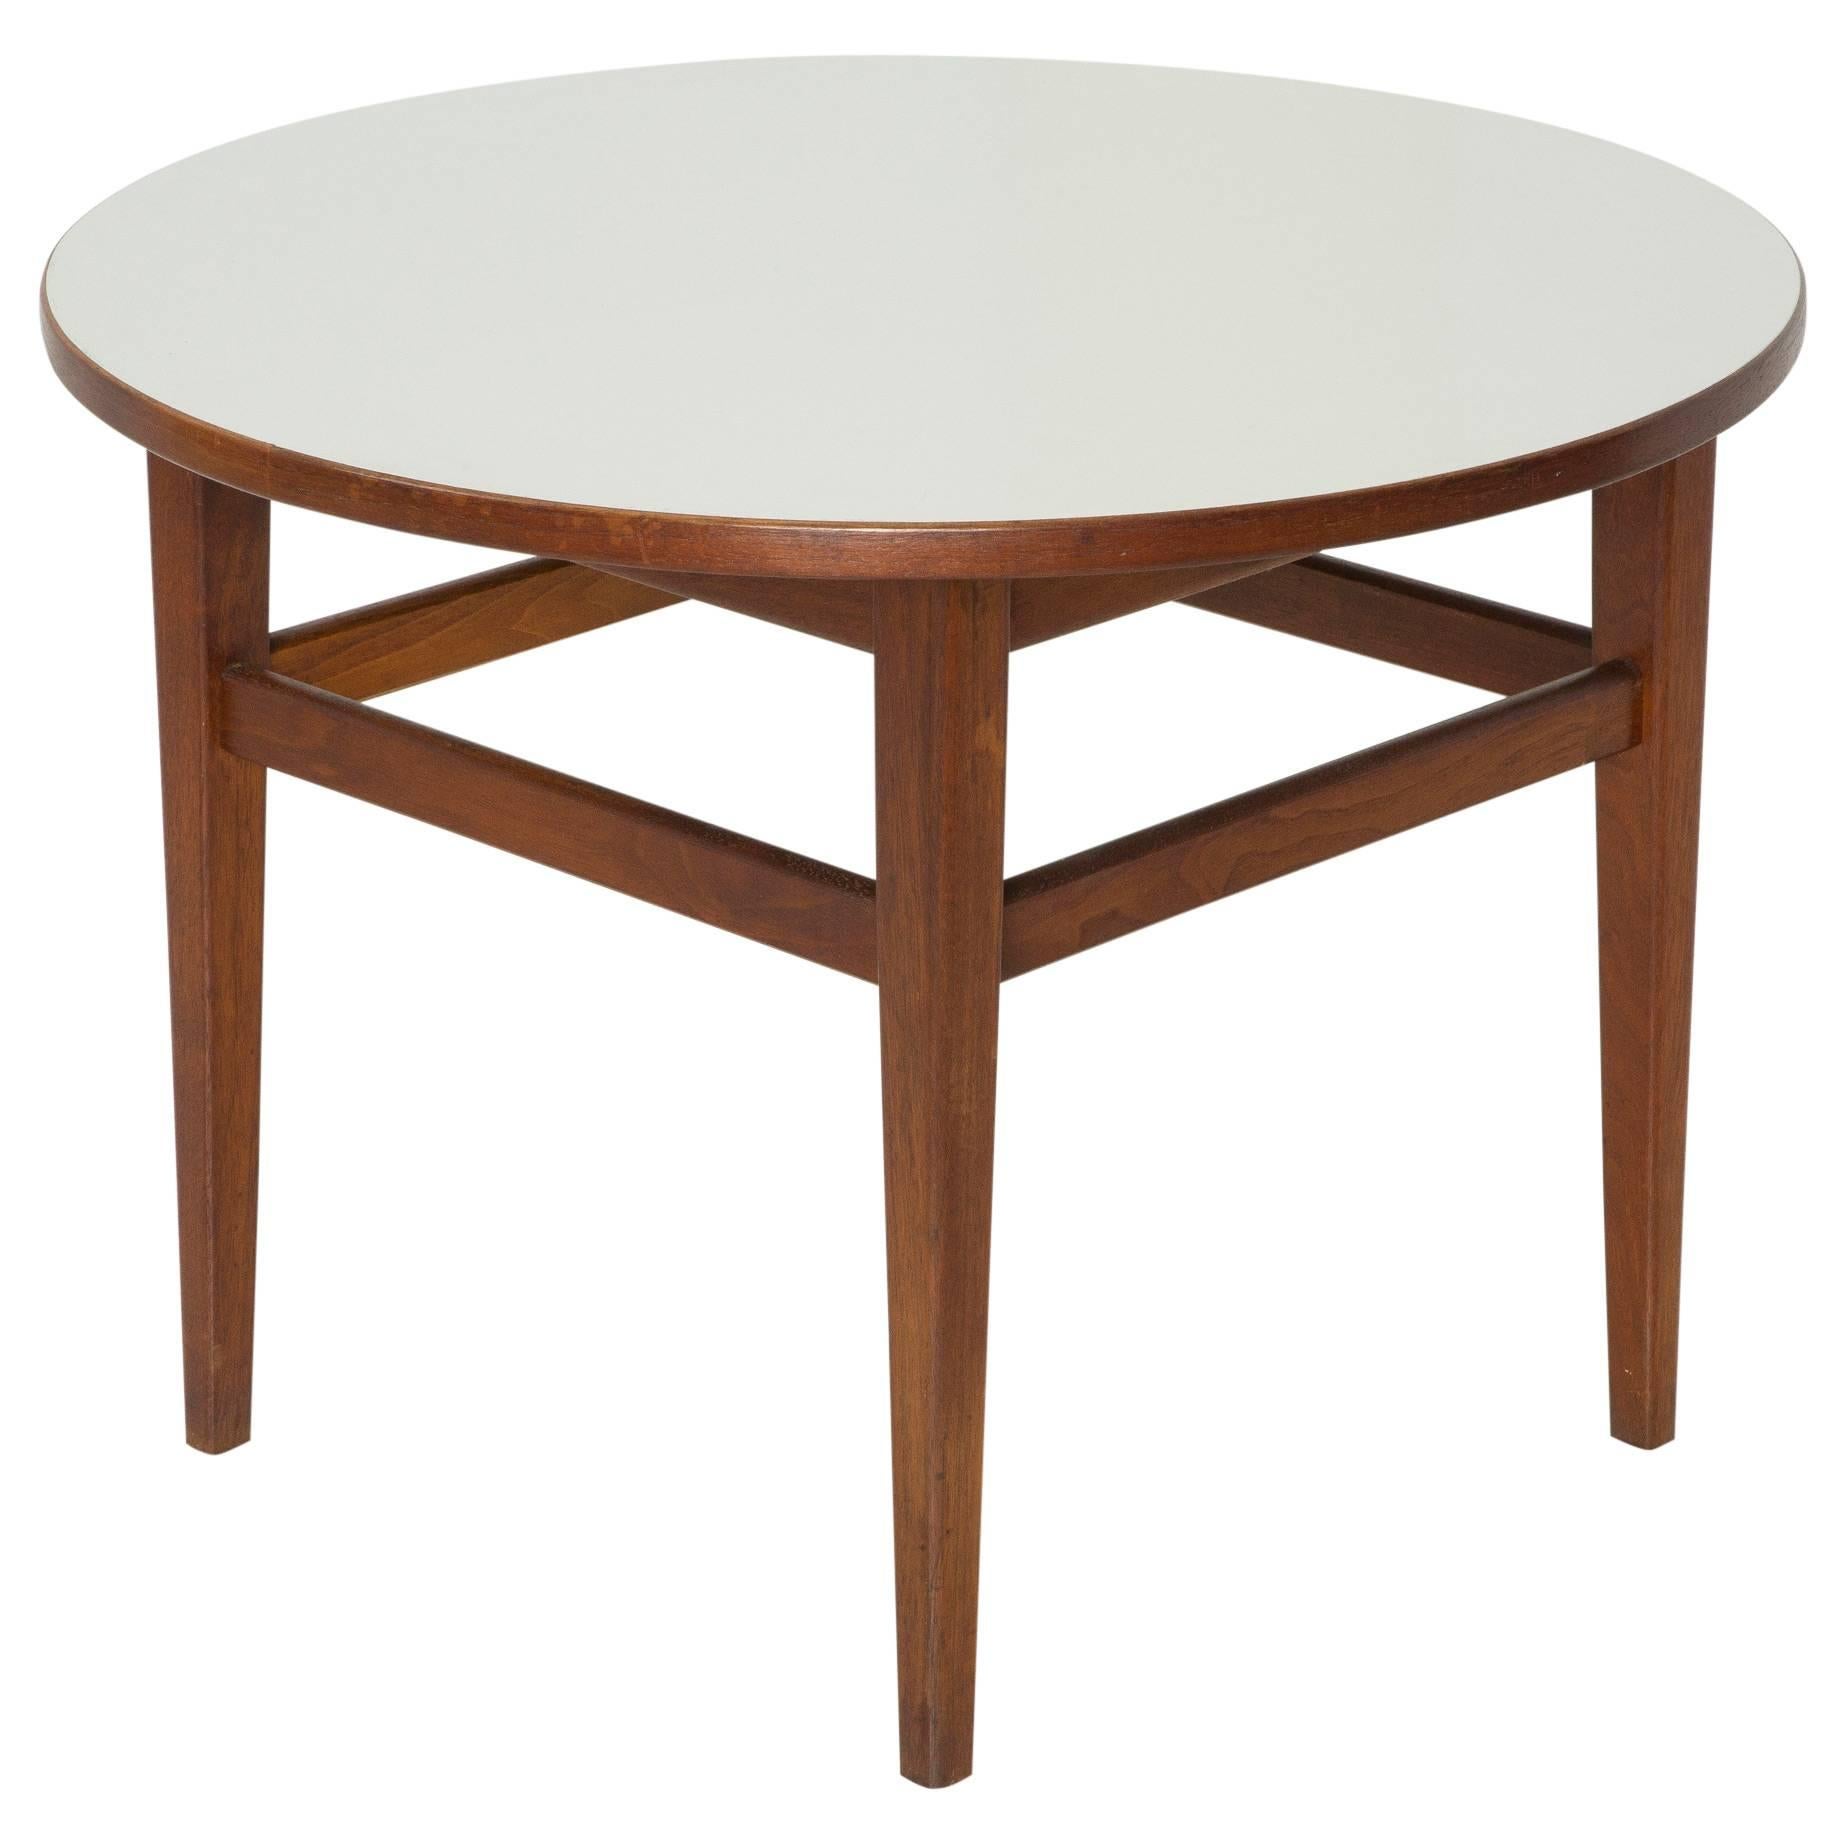 Lovely circular side table constructed of wood with white laminate top. In the style of Jens Risom. Can be used as a side, coffee, or occasional table.  

In excellent condition with light wear commensurate with age and use.  Contact us for a full